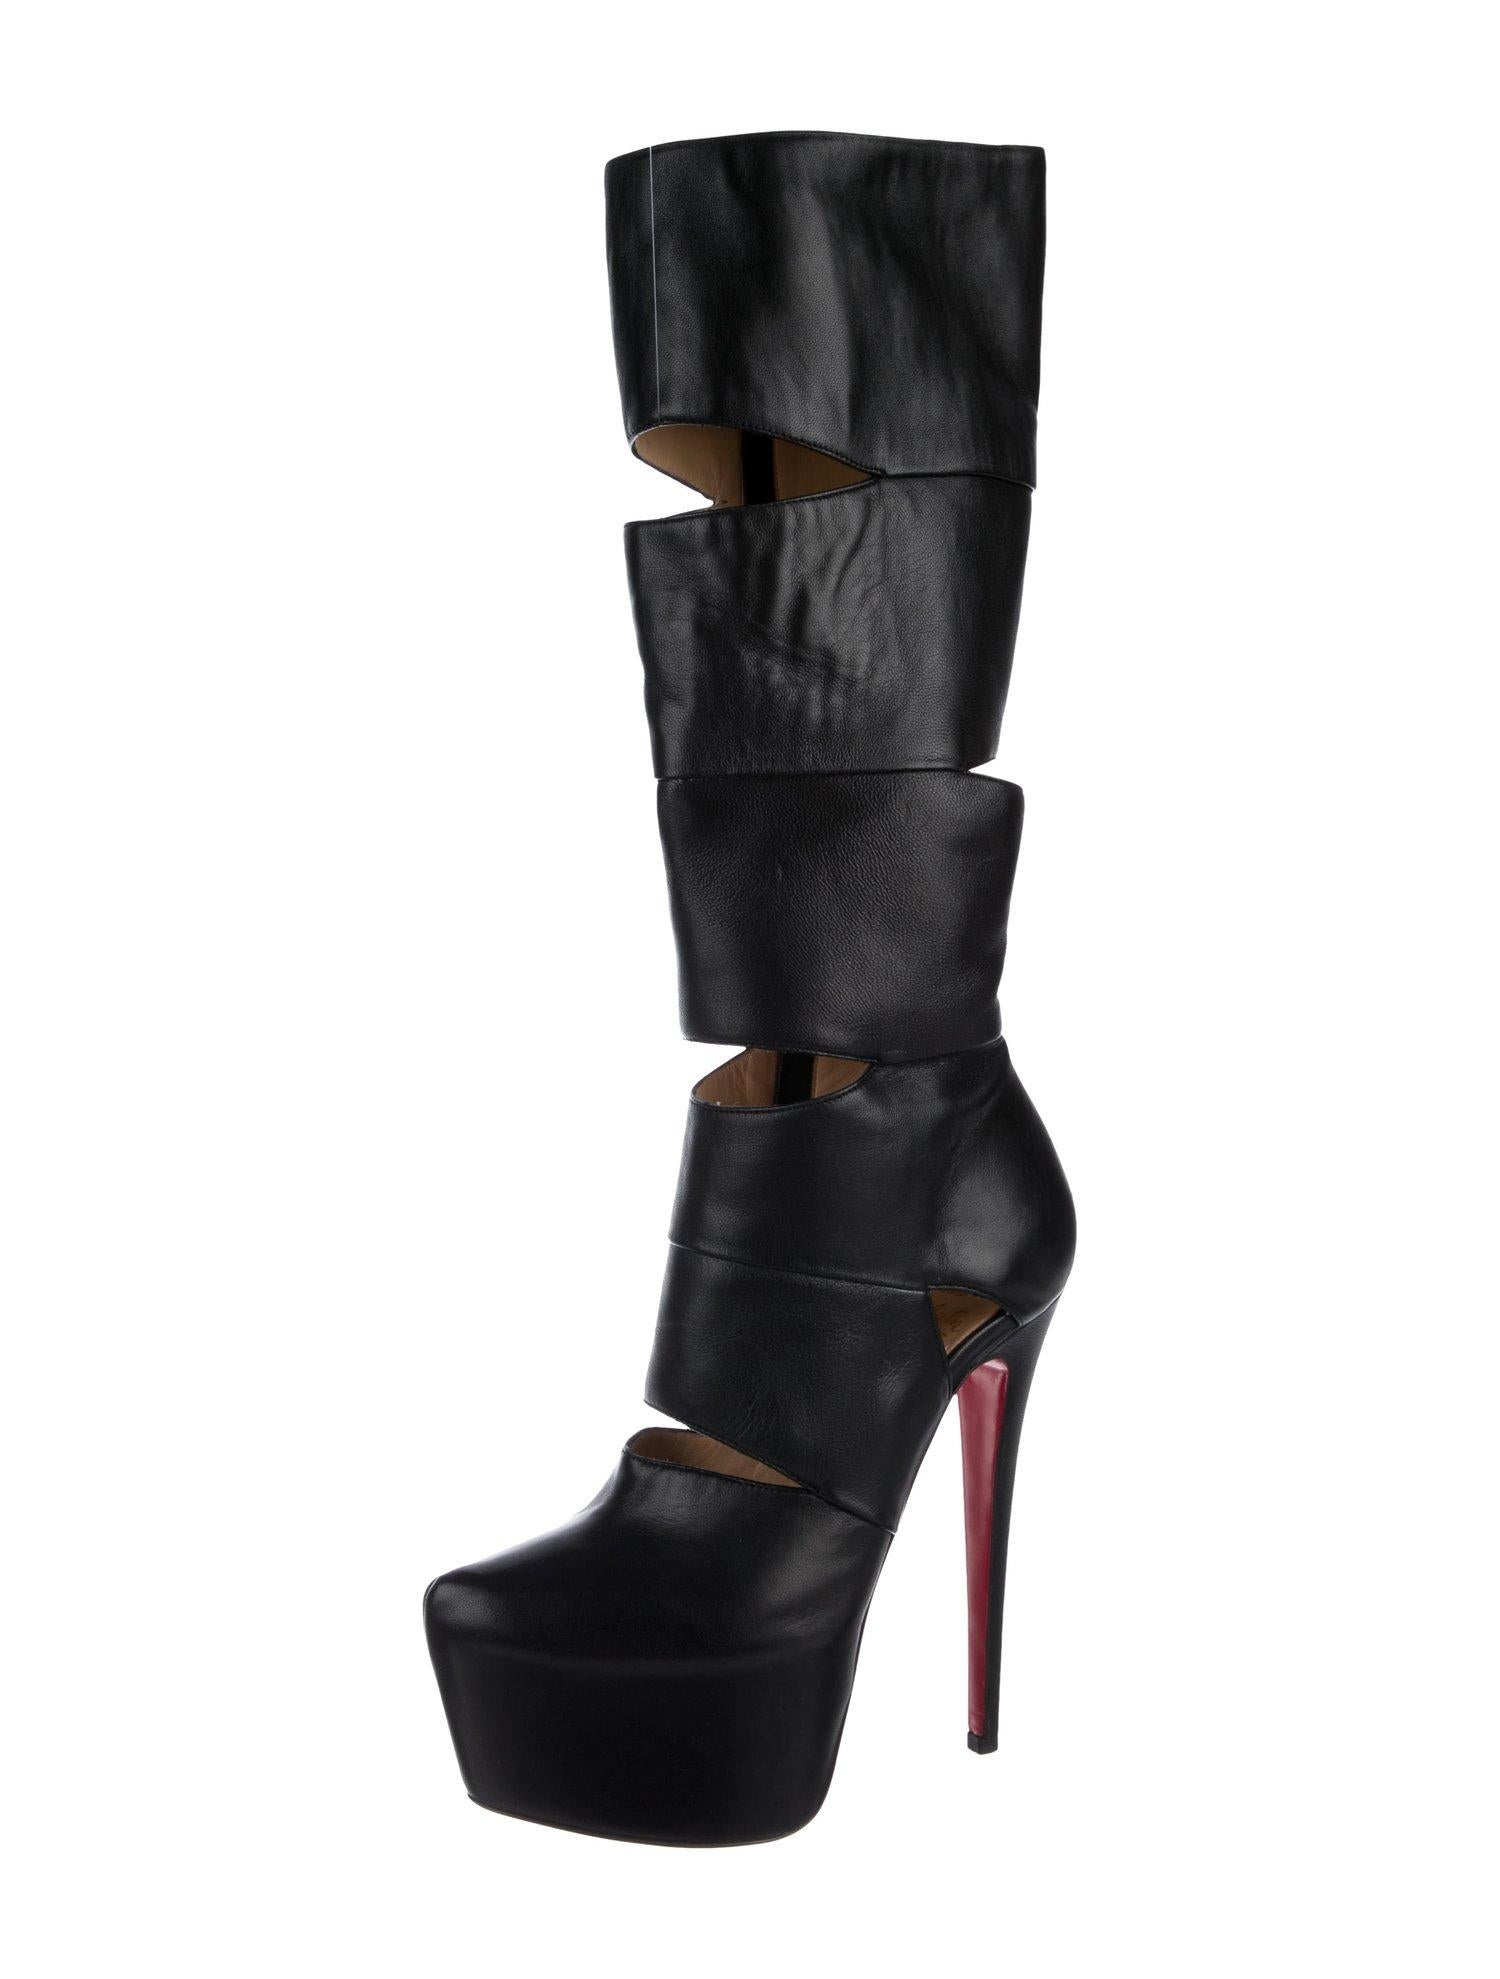 Women's Christian Louboutin NEW Black Leather Cut Out Platform Evening Boots